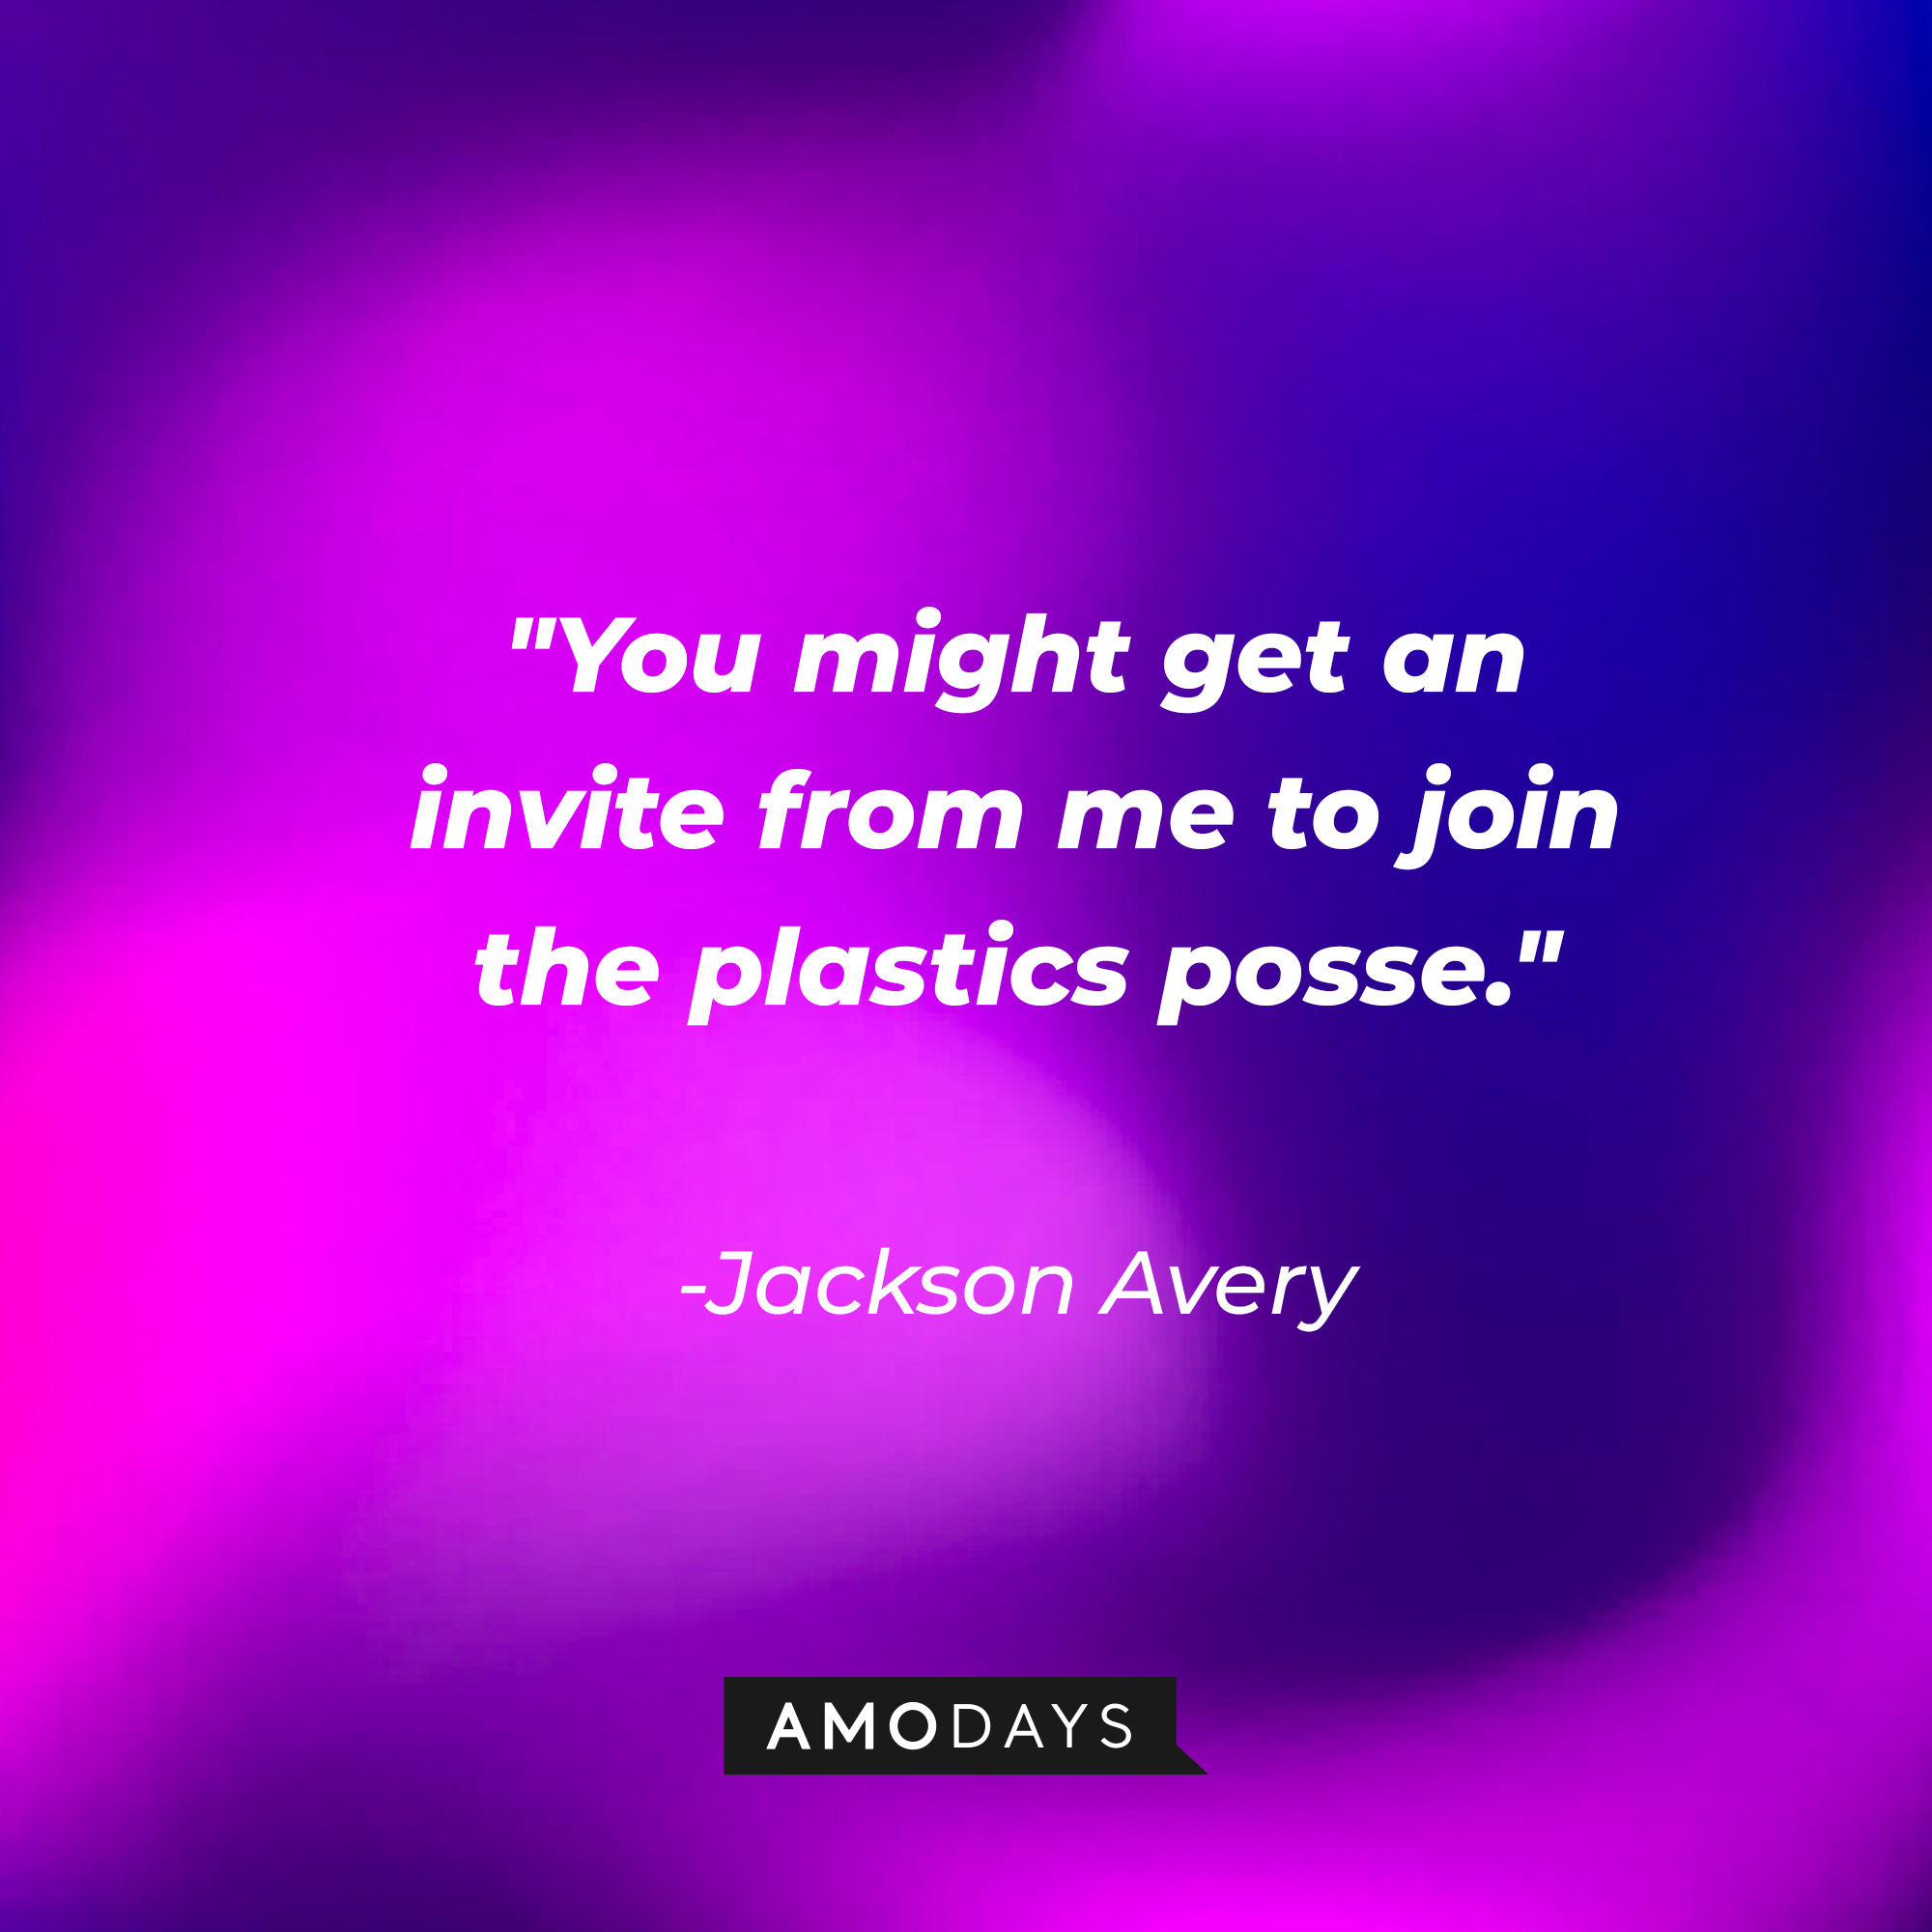 Jackson Avery’s quote: “You might get an invite from me to join the plastics posse.” |Source: AmoDays